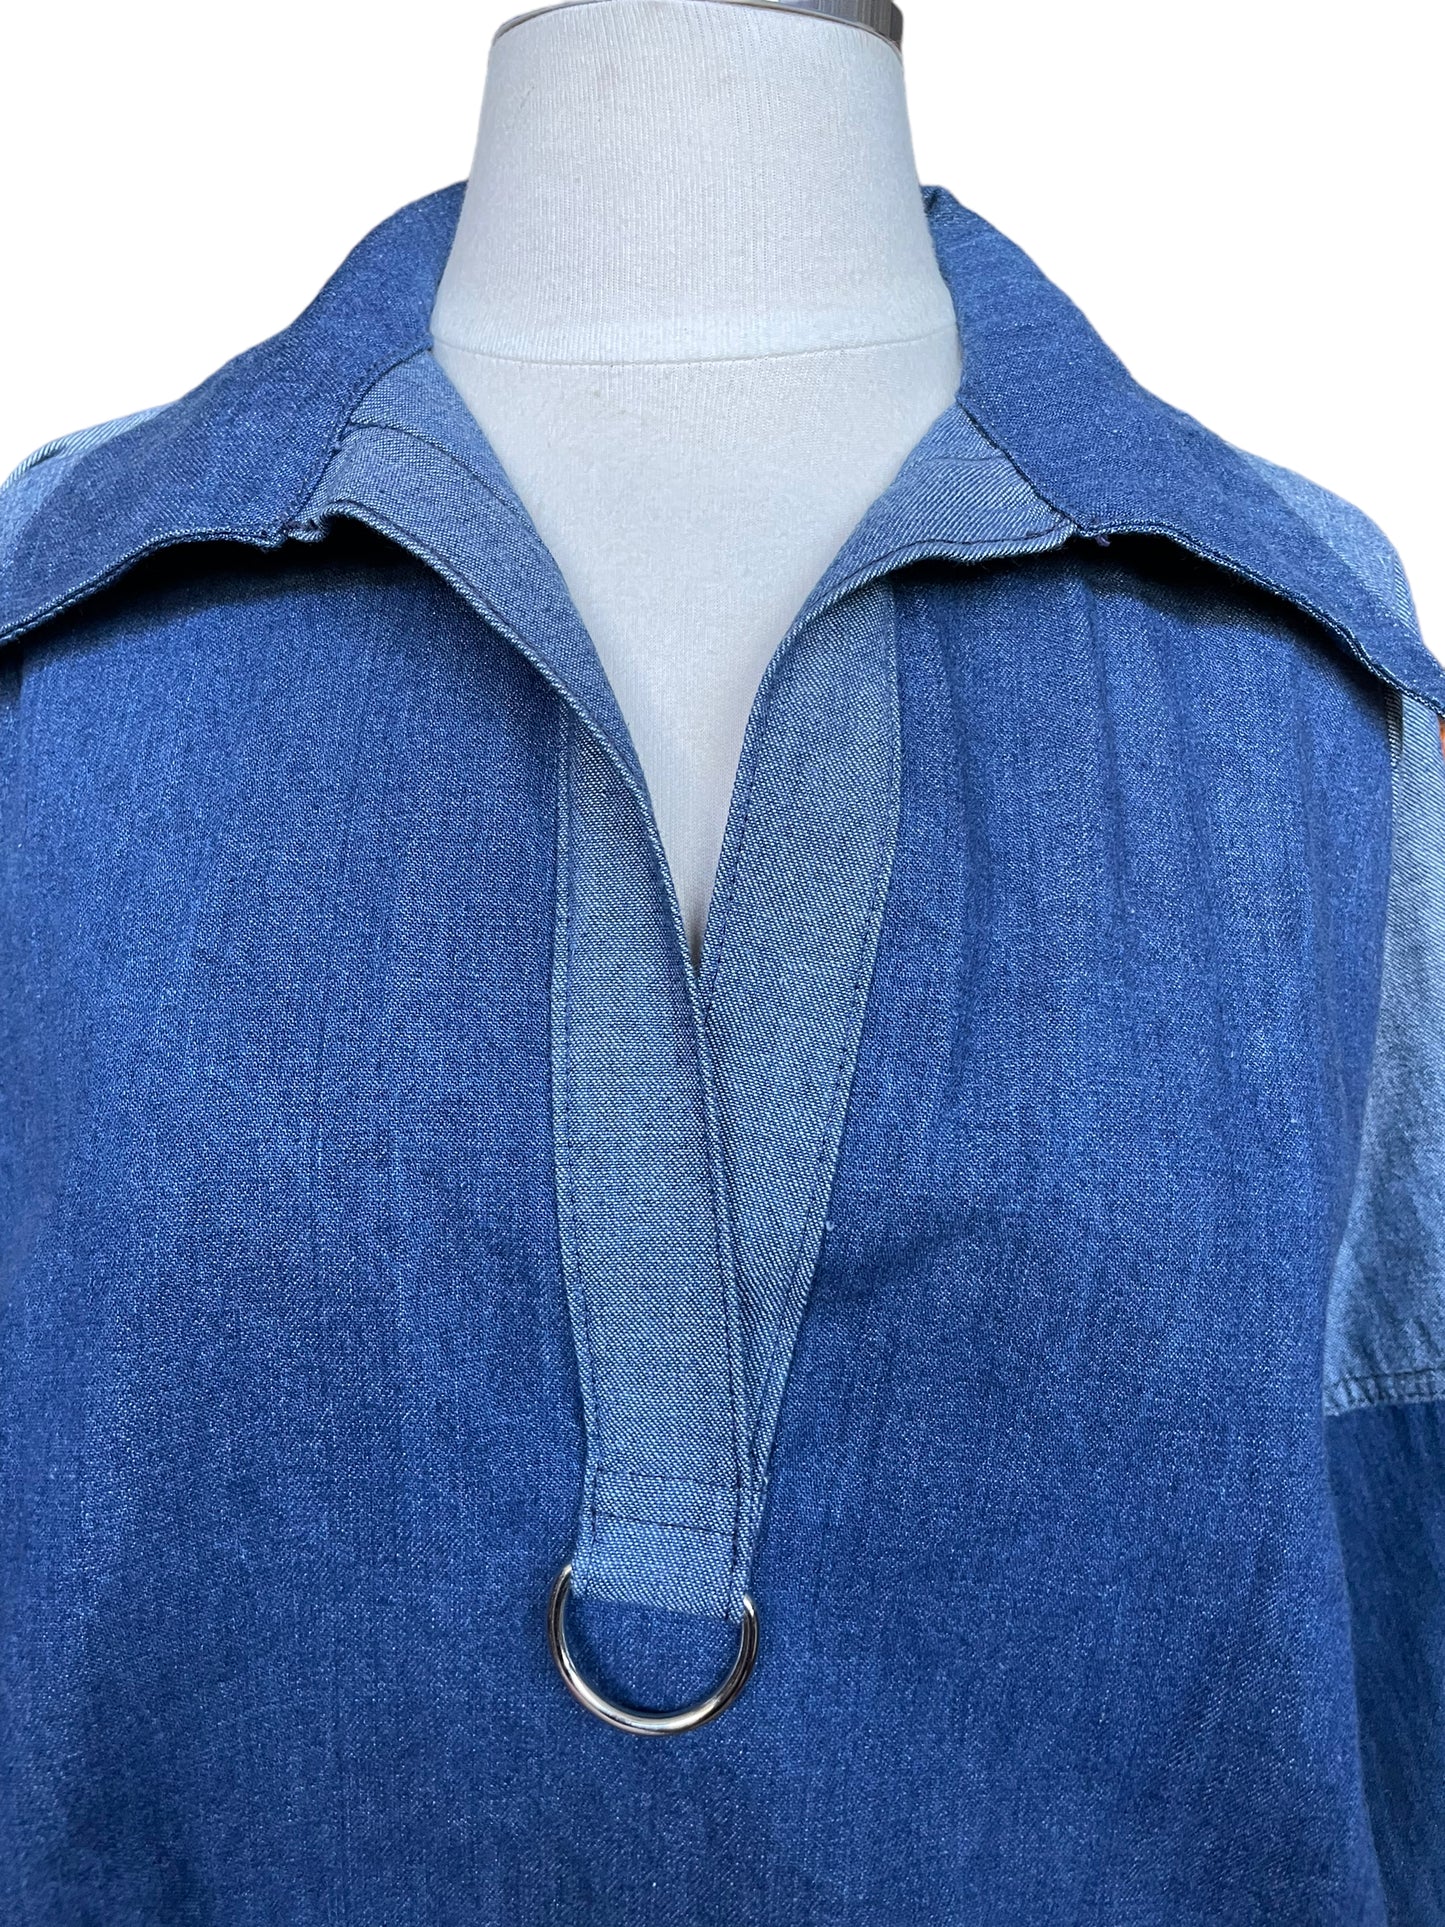 Collar view of Vintage 1970s Pacific Play Togs Denim Pull Over | Vintage Shirts & Tops | Barn Owl Vintage Seattle